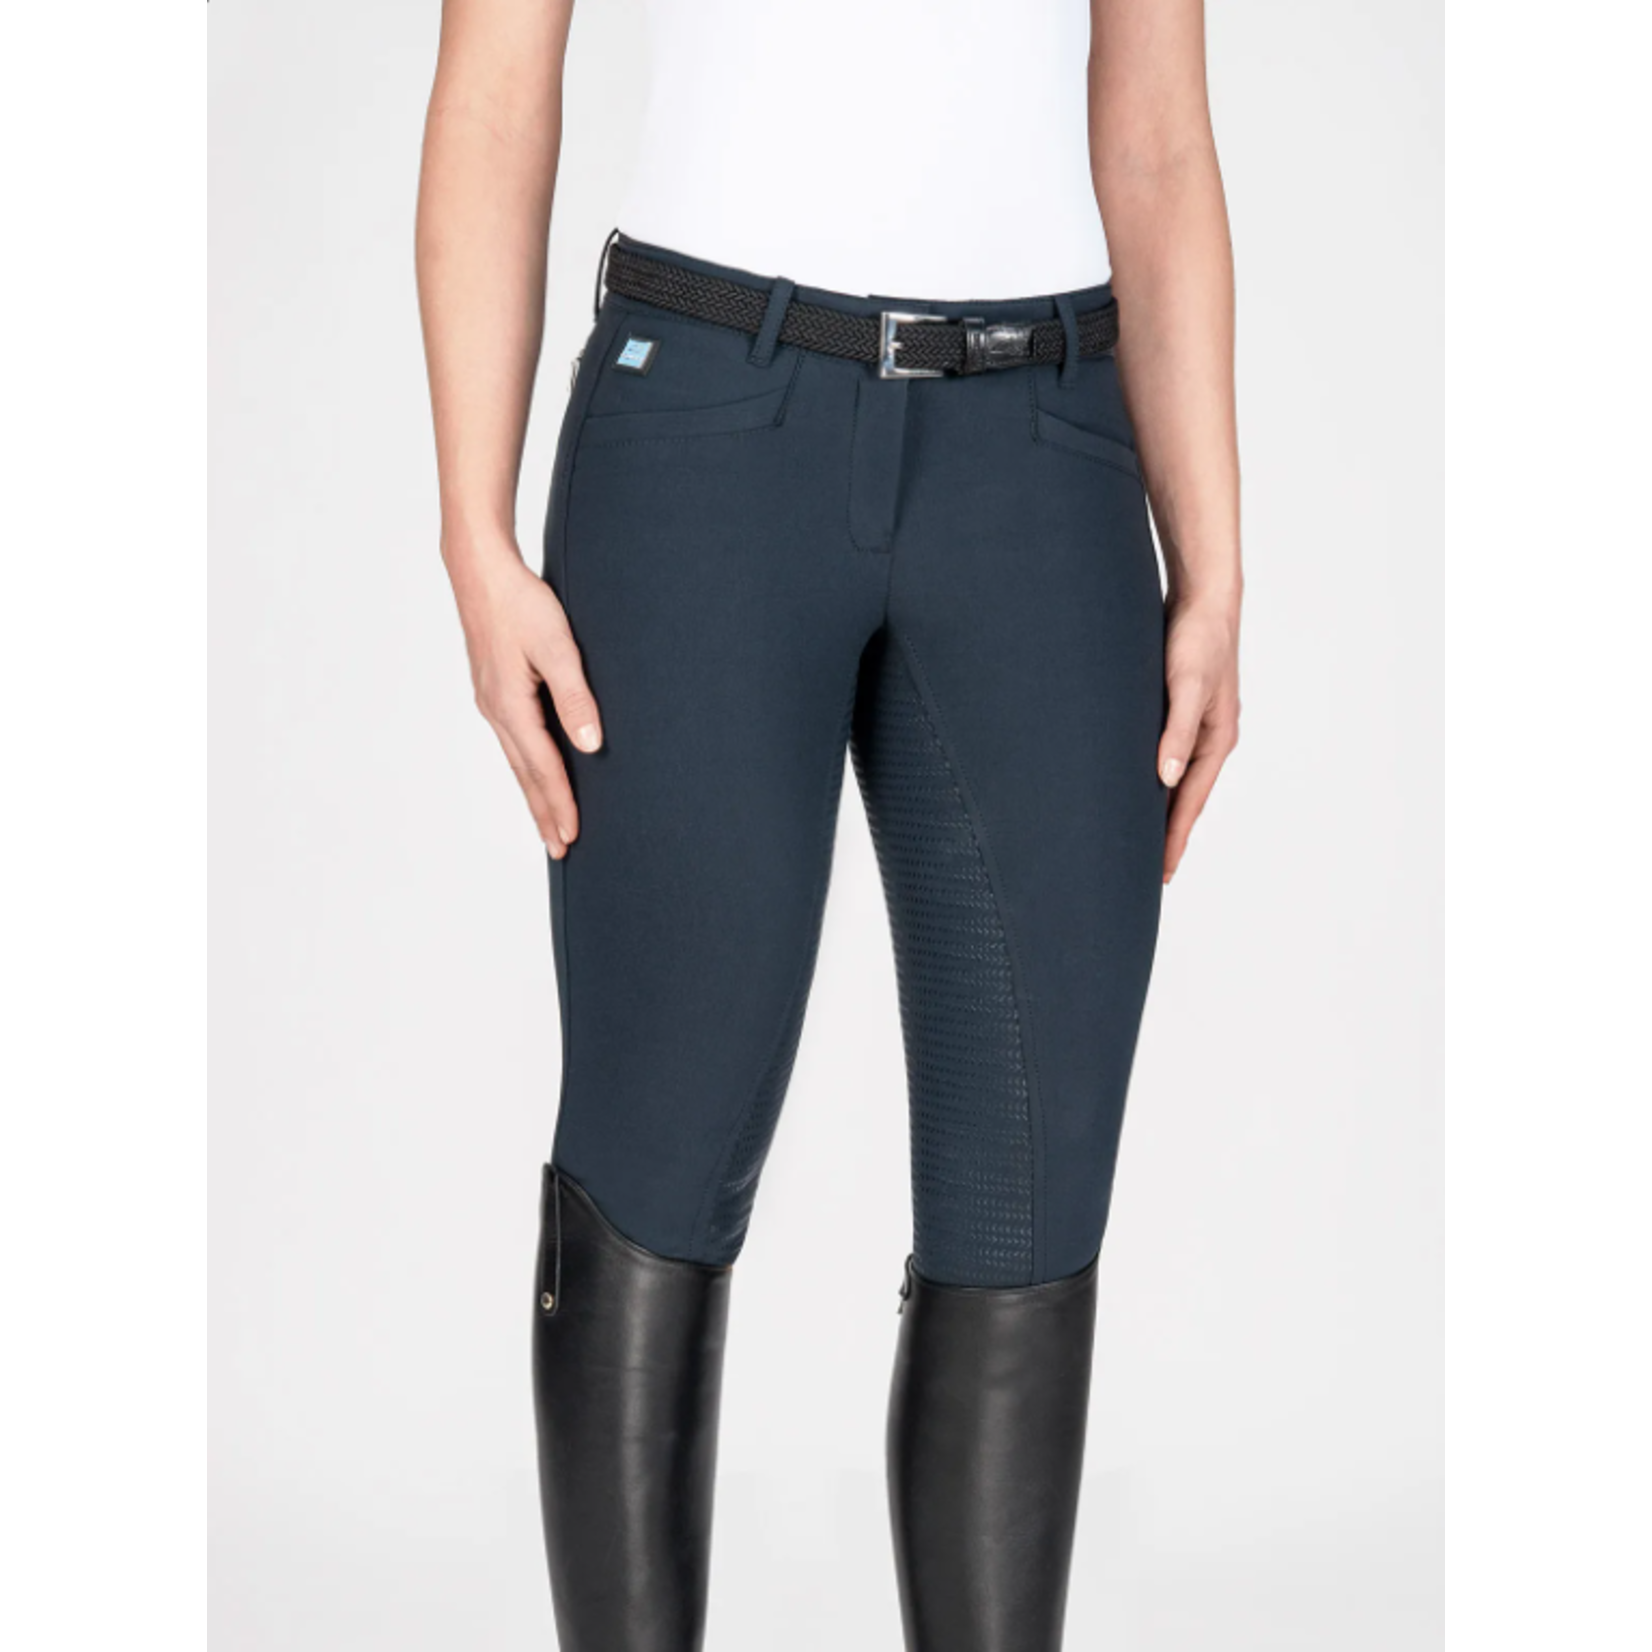 Equiline Equiline Cedar Breeches